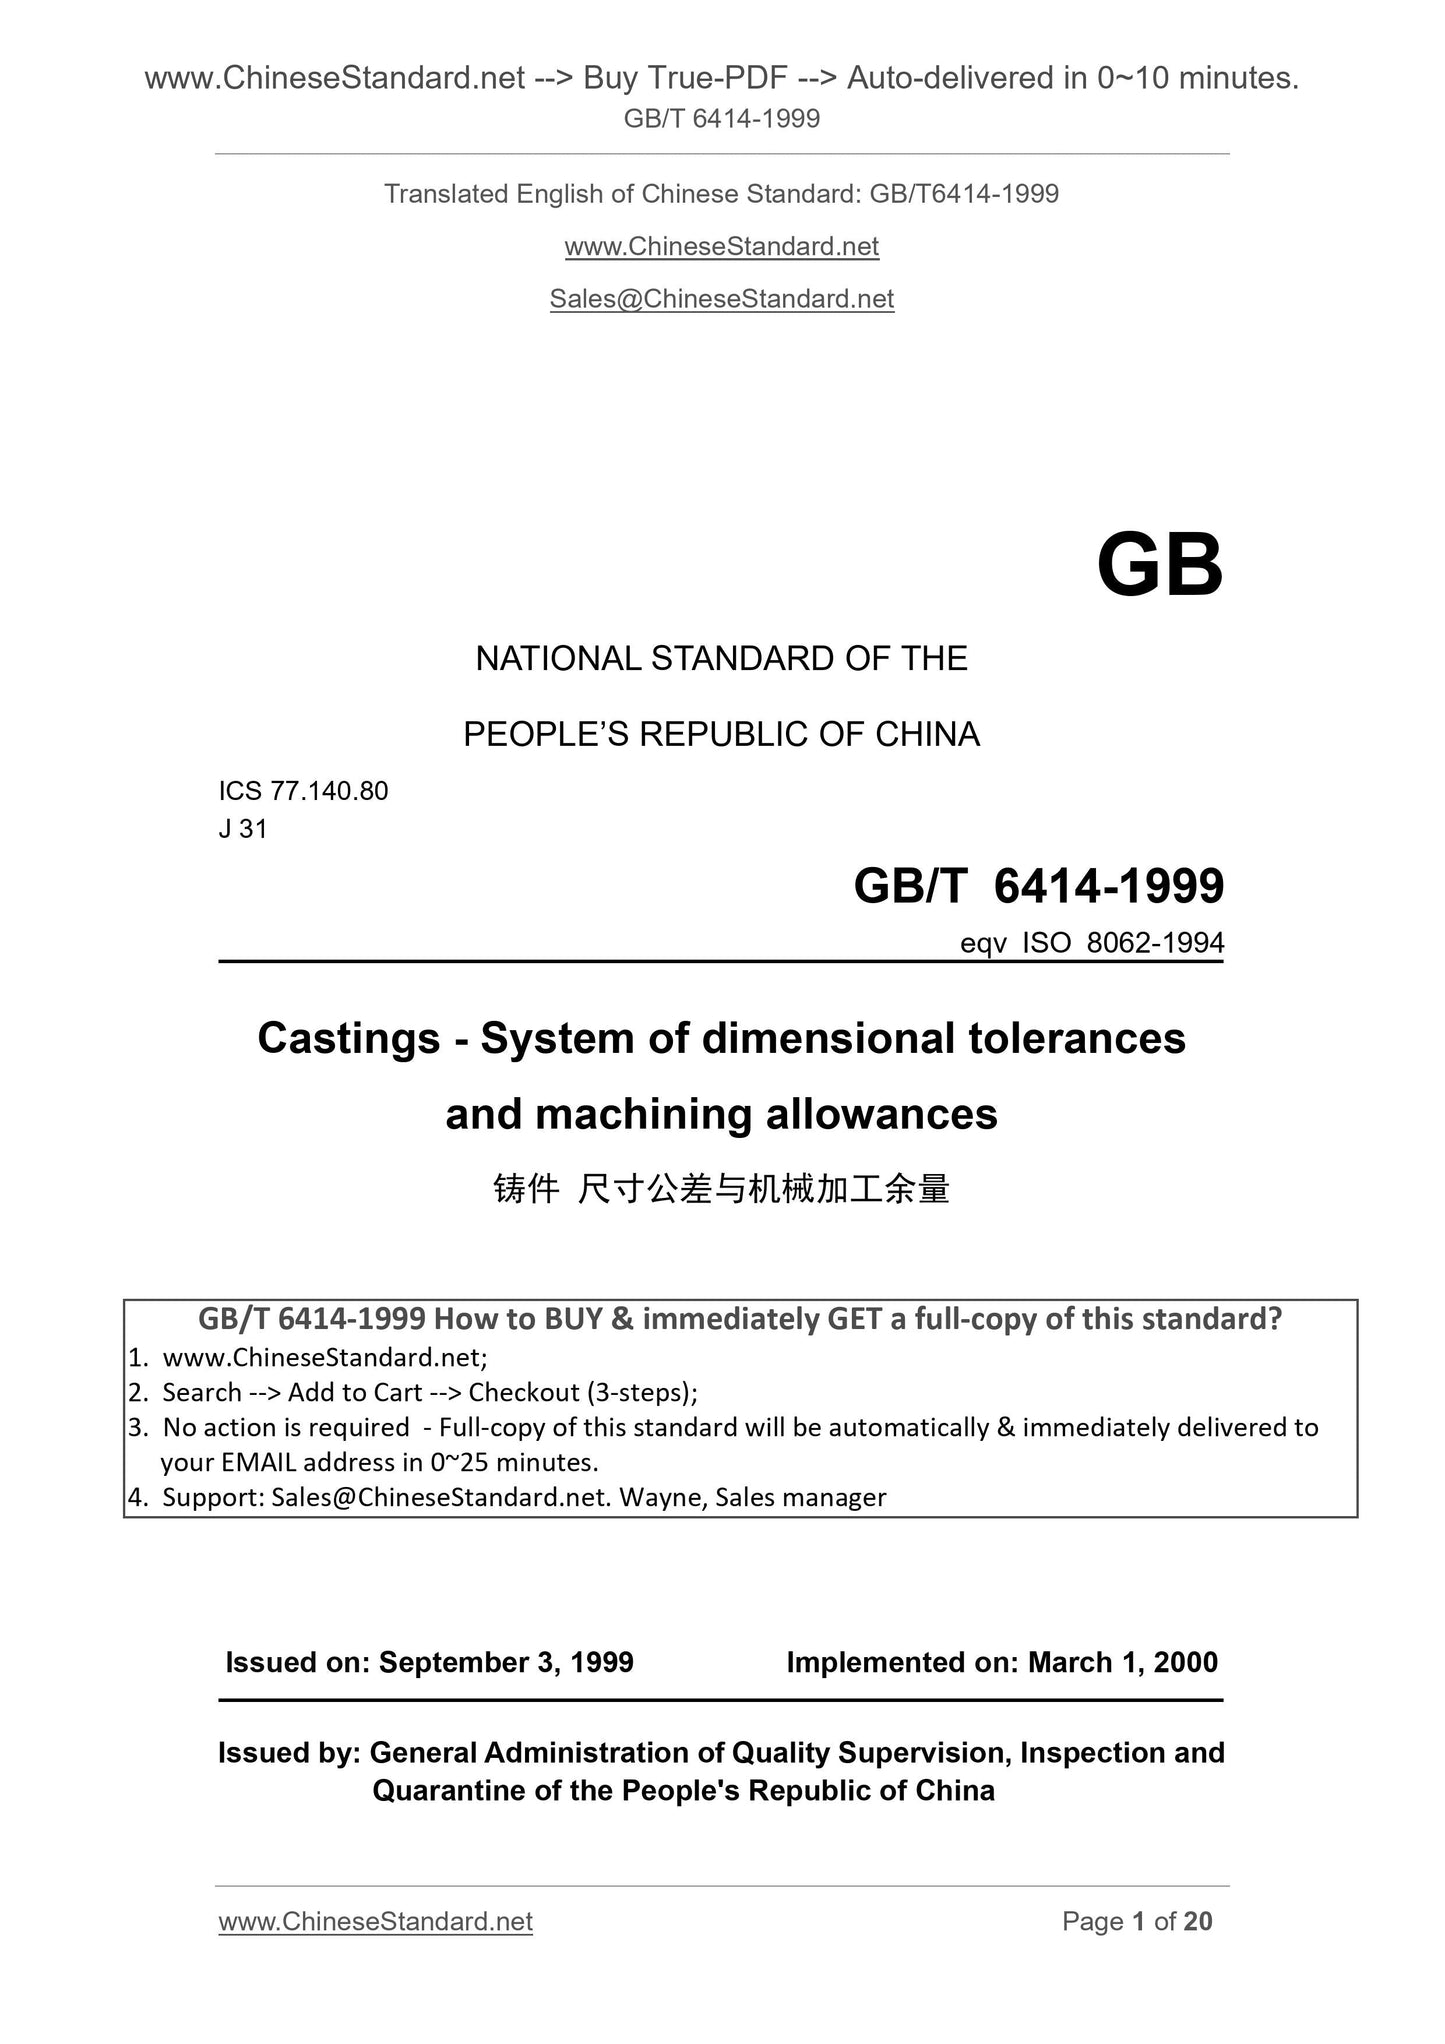 GB/T 6414-1999 Page 1